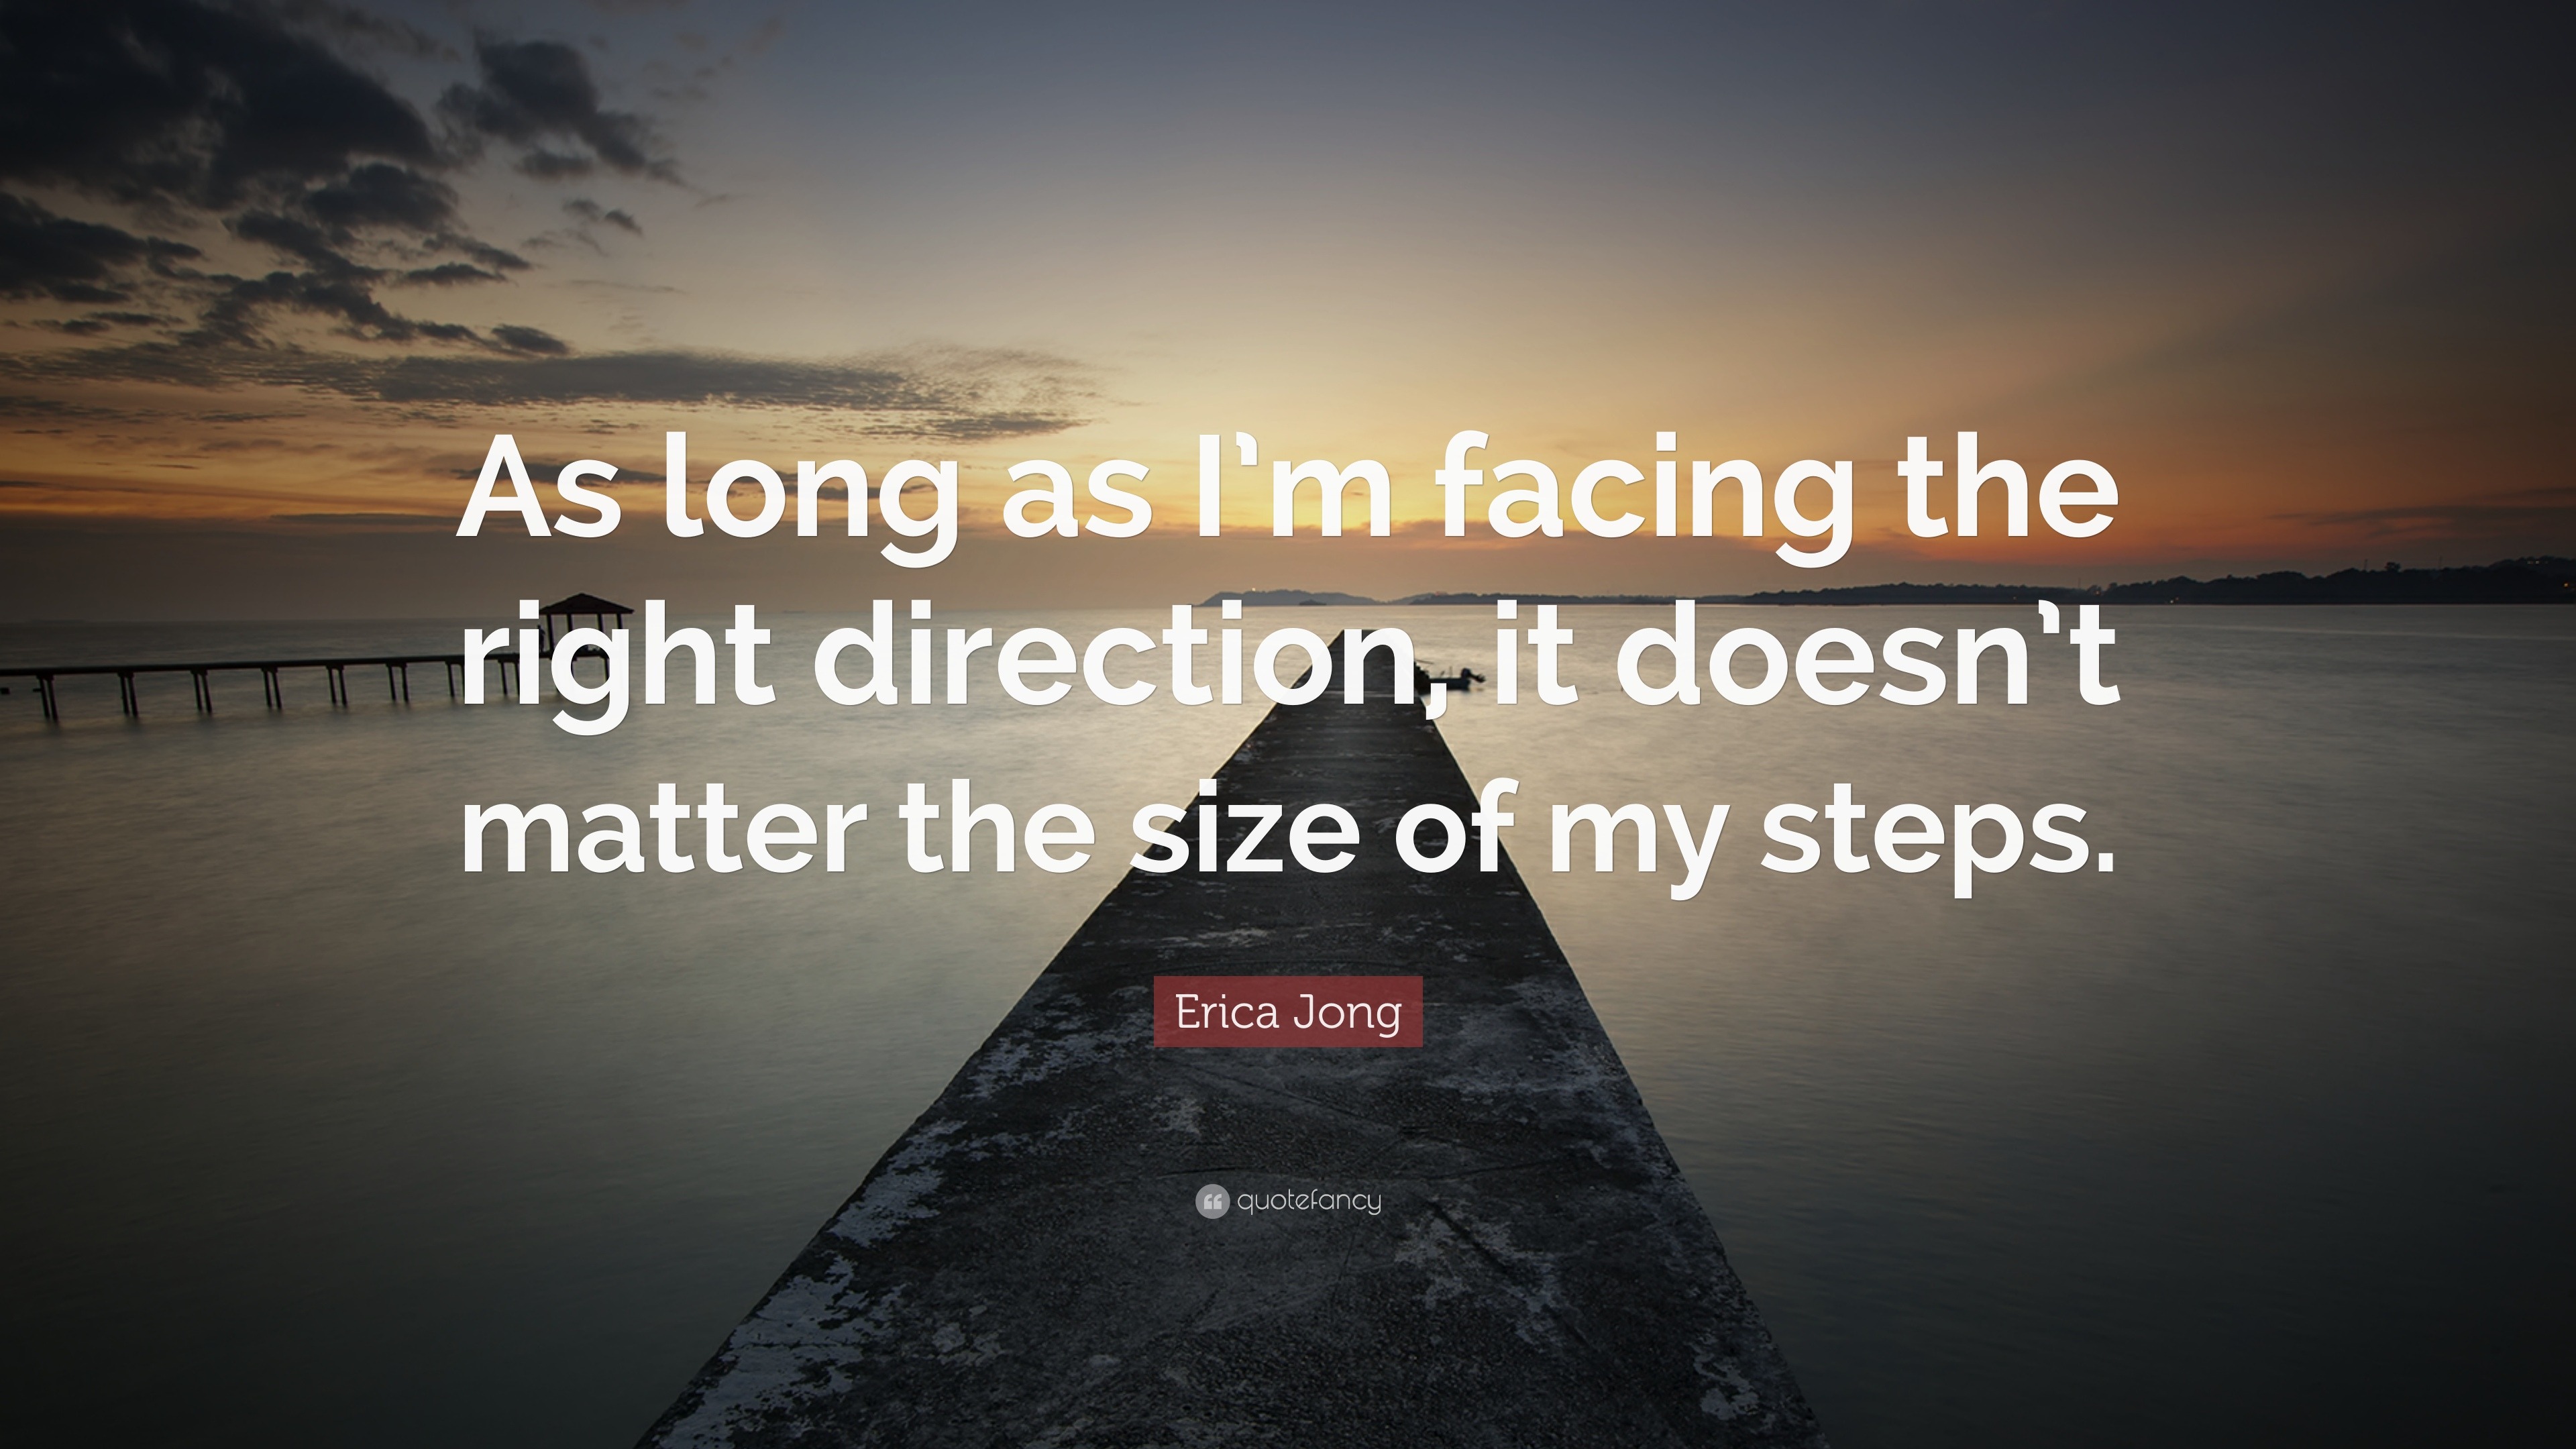 Erica Jong Quote: “As long as I’m facing the right direction, it doesn